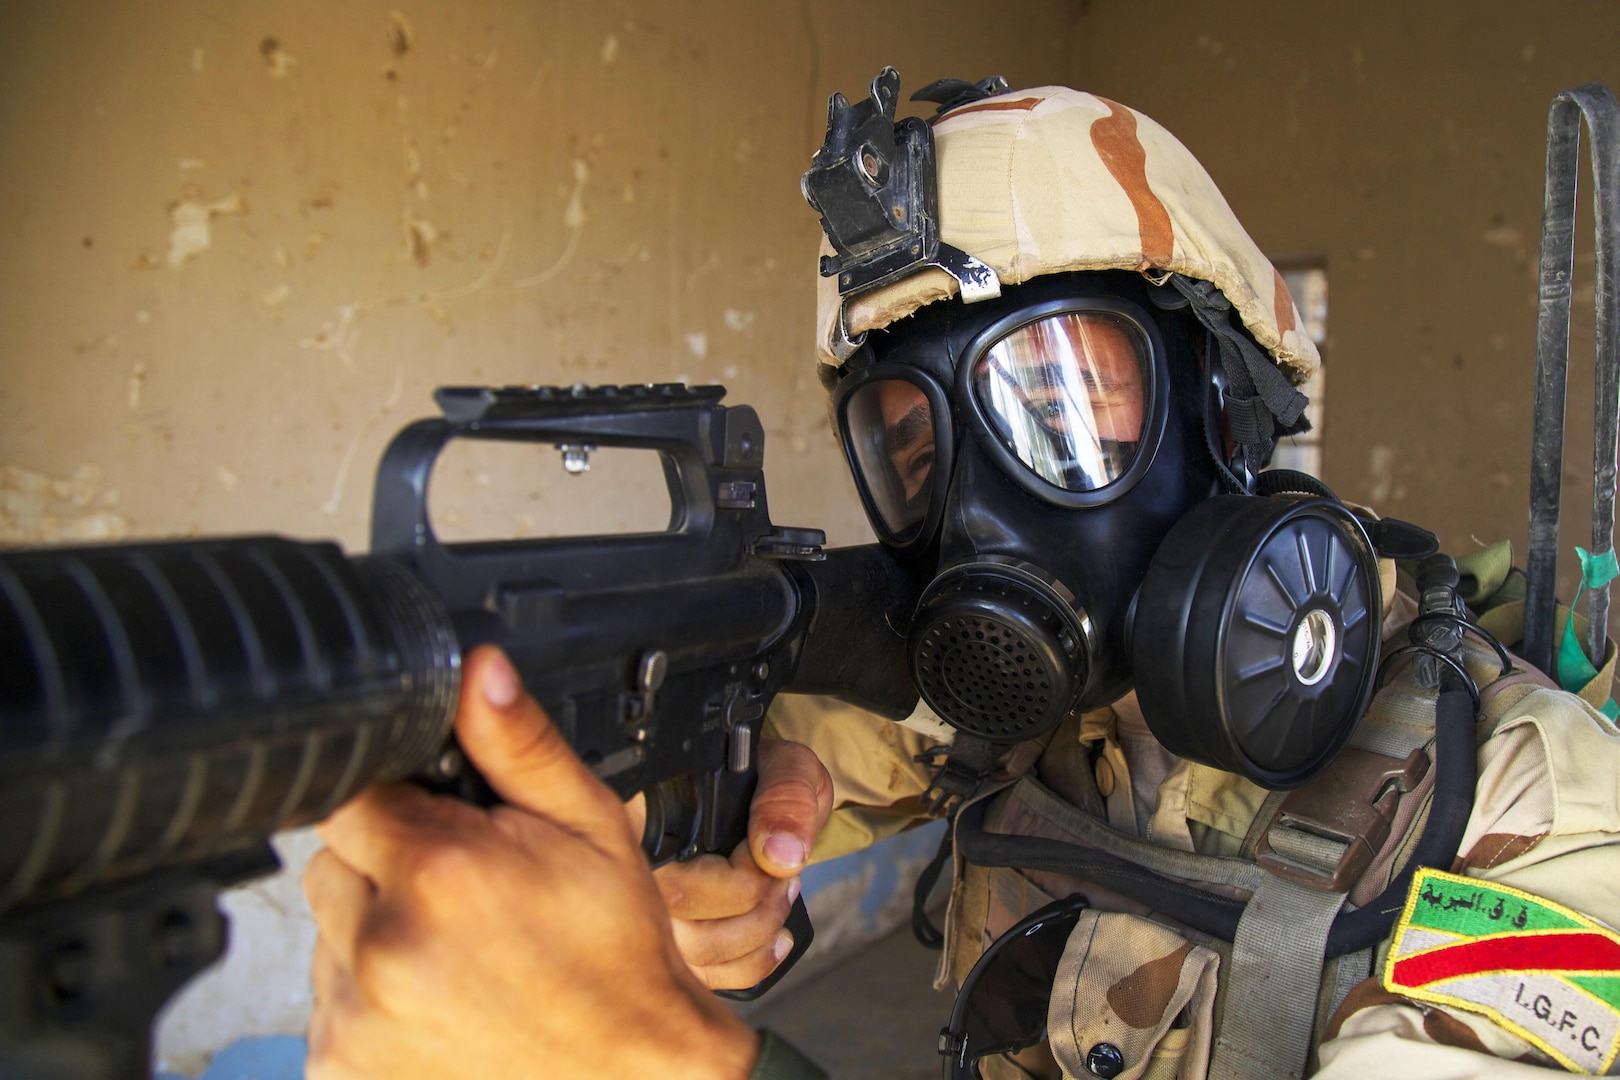 An Iraqi soldier attending the advanced infantry course provides security during chemical, biological, radiological and nuclear defense training at Camp Taji, Iraq, Oct. 9, 2016. This training helps Iraqi soldiers understand and defend against CBRN threats. This training is critical to enabling ISF to counter Islamic State of Iraq and the Levant as they work to regain territory from the terrorist group and support Combined Joint Task Force - Operation Inherent Resolve's building partner capacity mission. (U.S. Army photo by Spc. Craig Jensen)